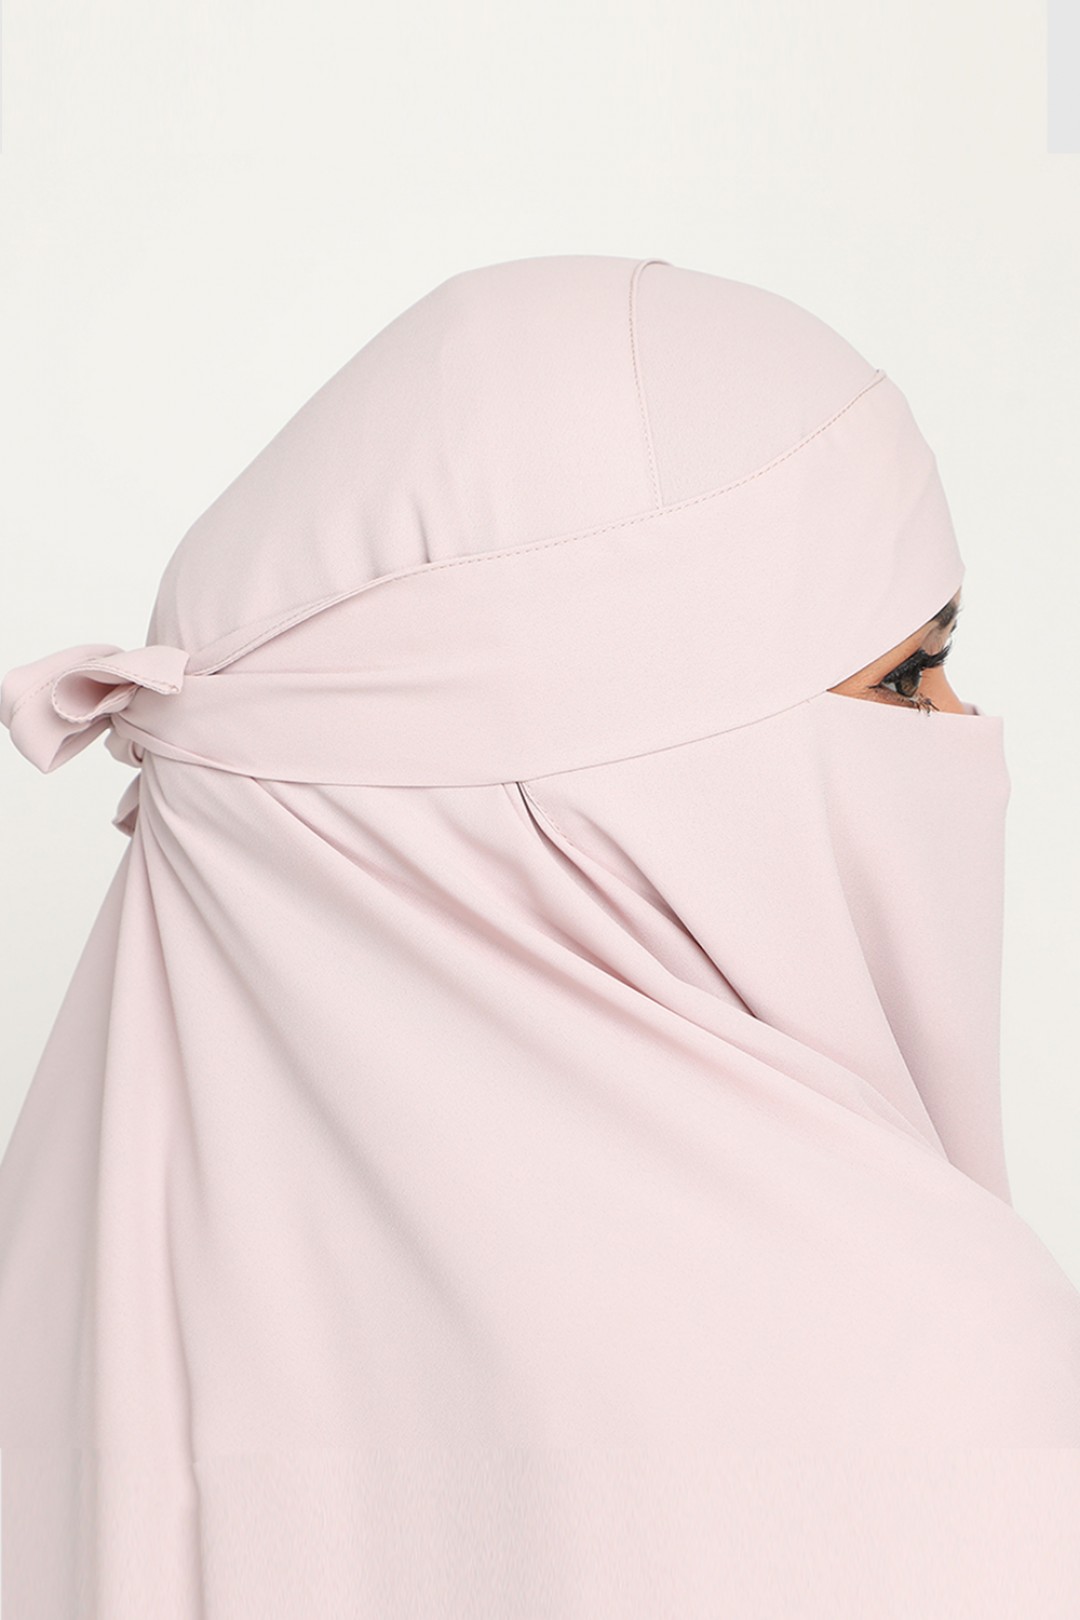 As-Is Niqab Ice Blue